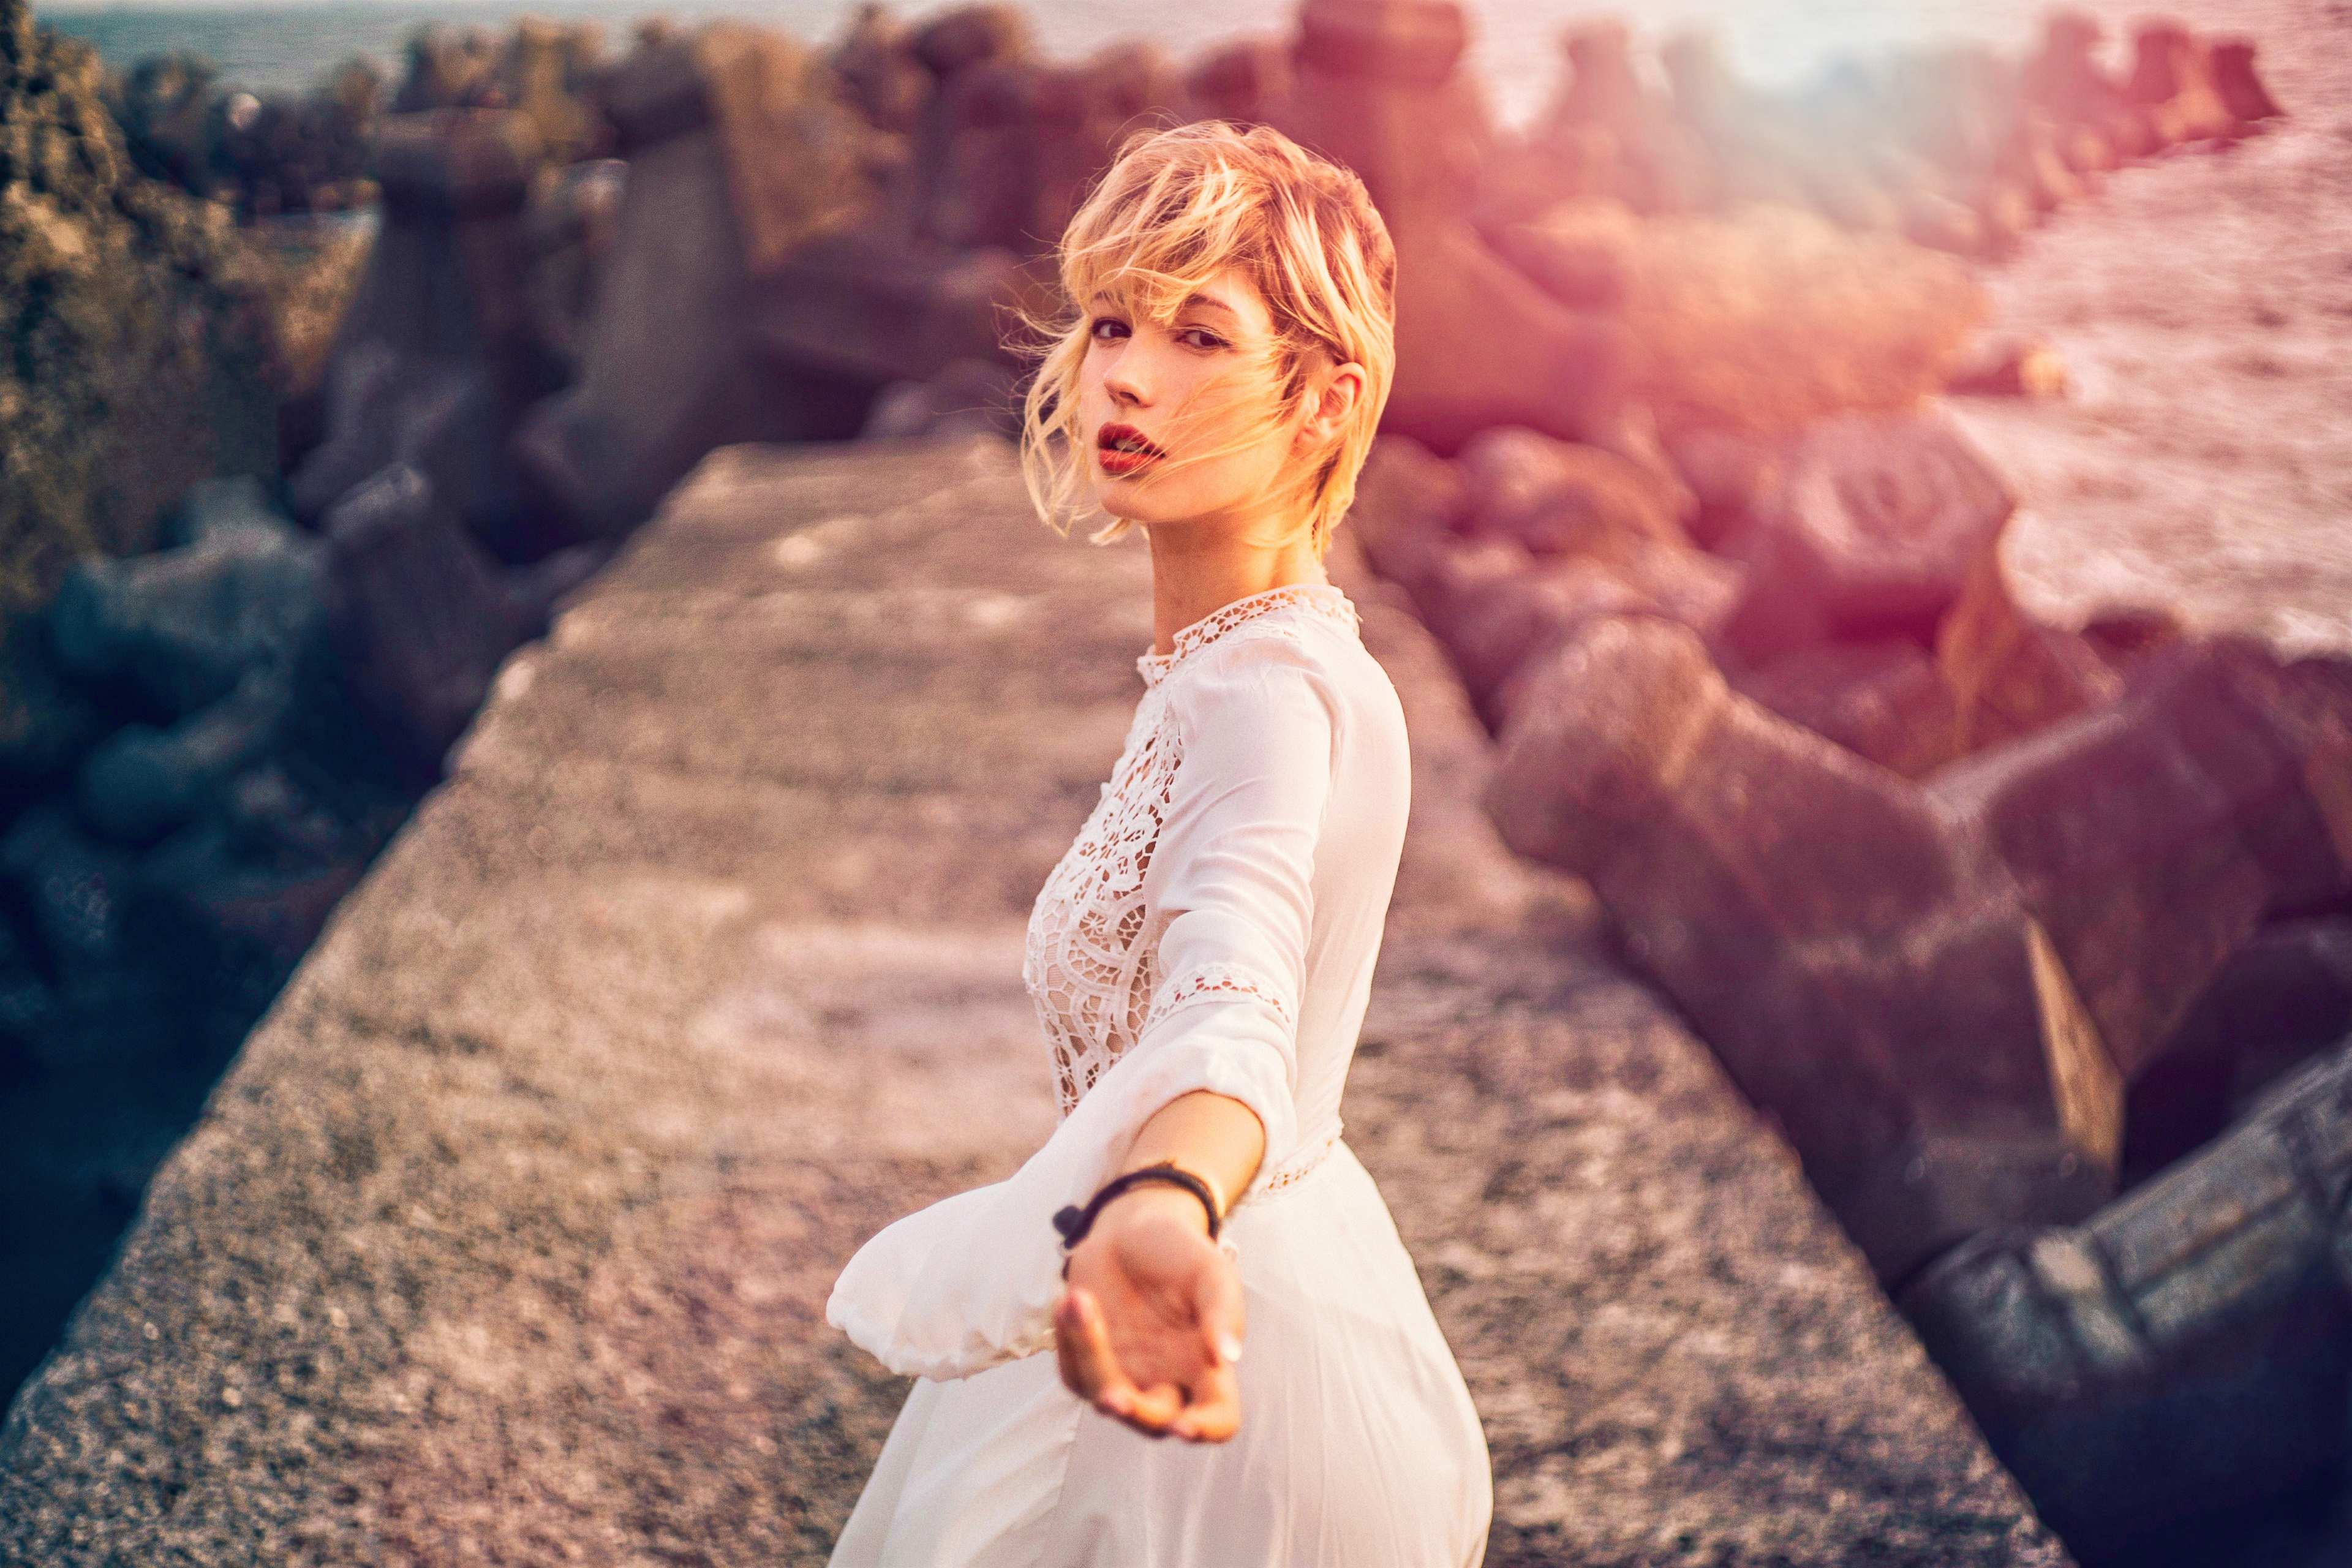 People 3840x2560 women women outdoors warm colors warm light water rocks blonde hand gesture looking at viewer photography depth of field white dress sunlight